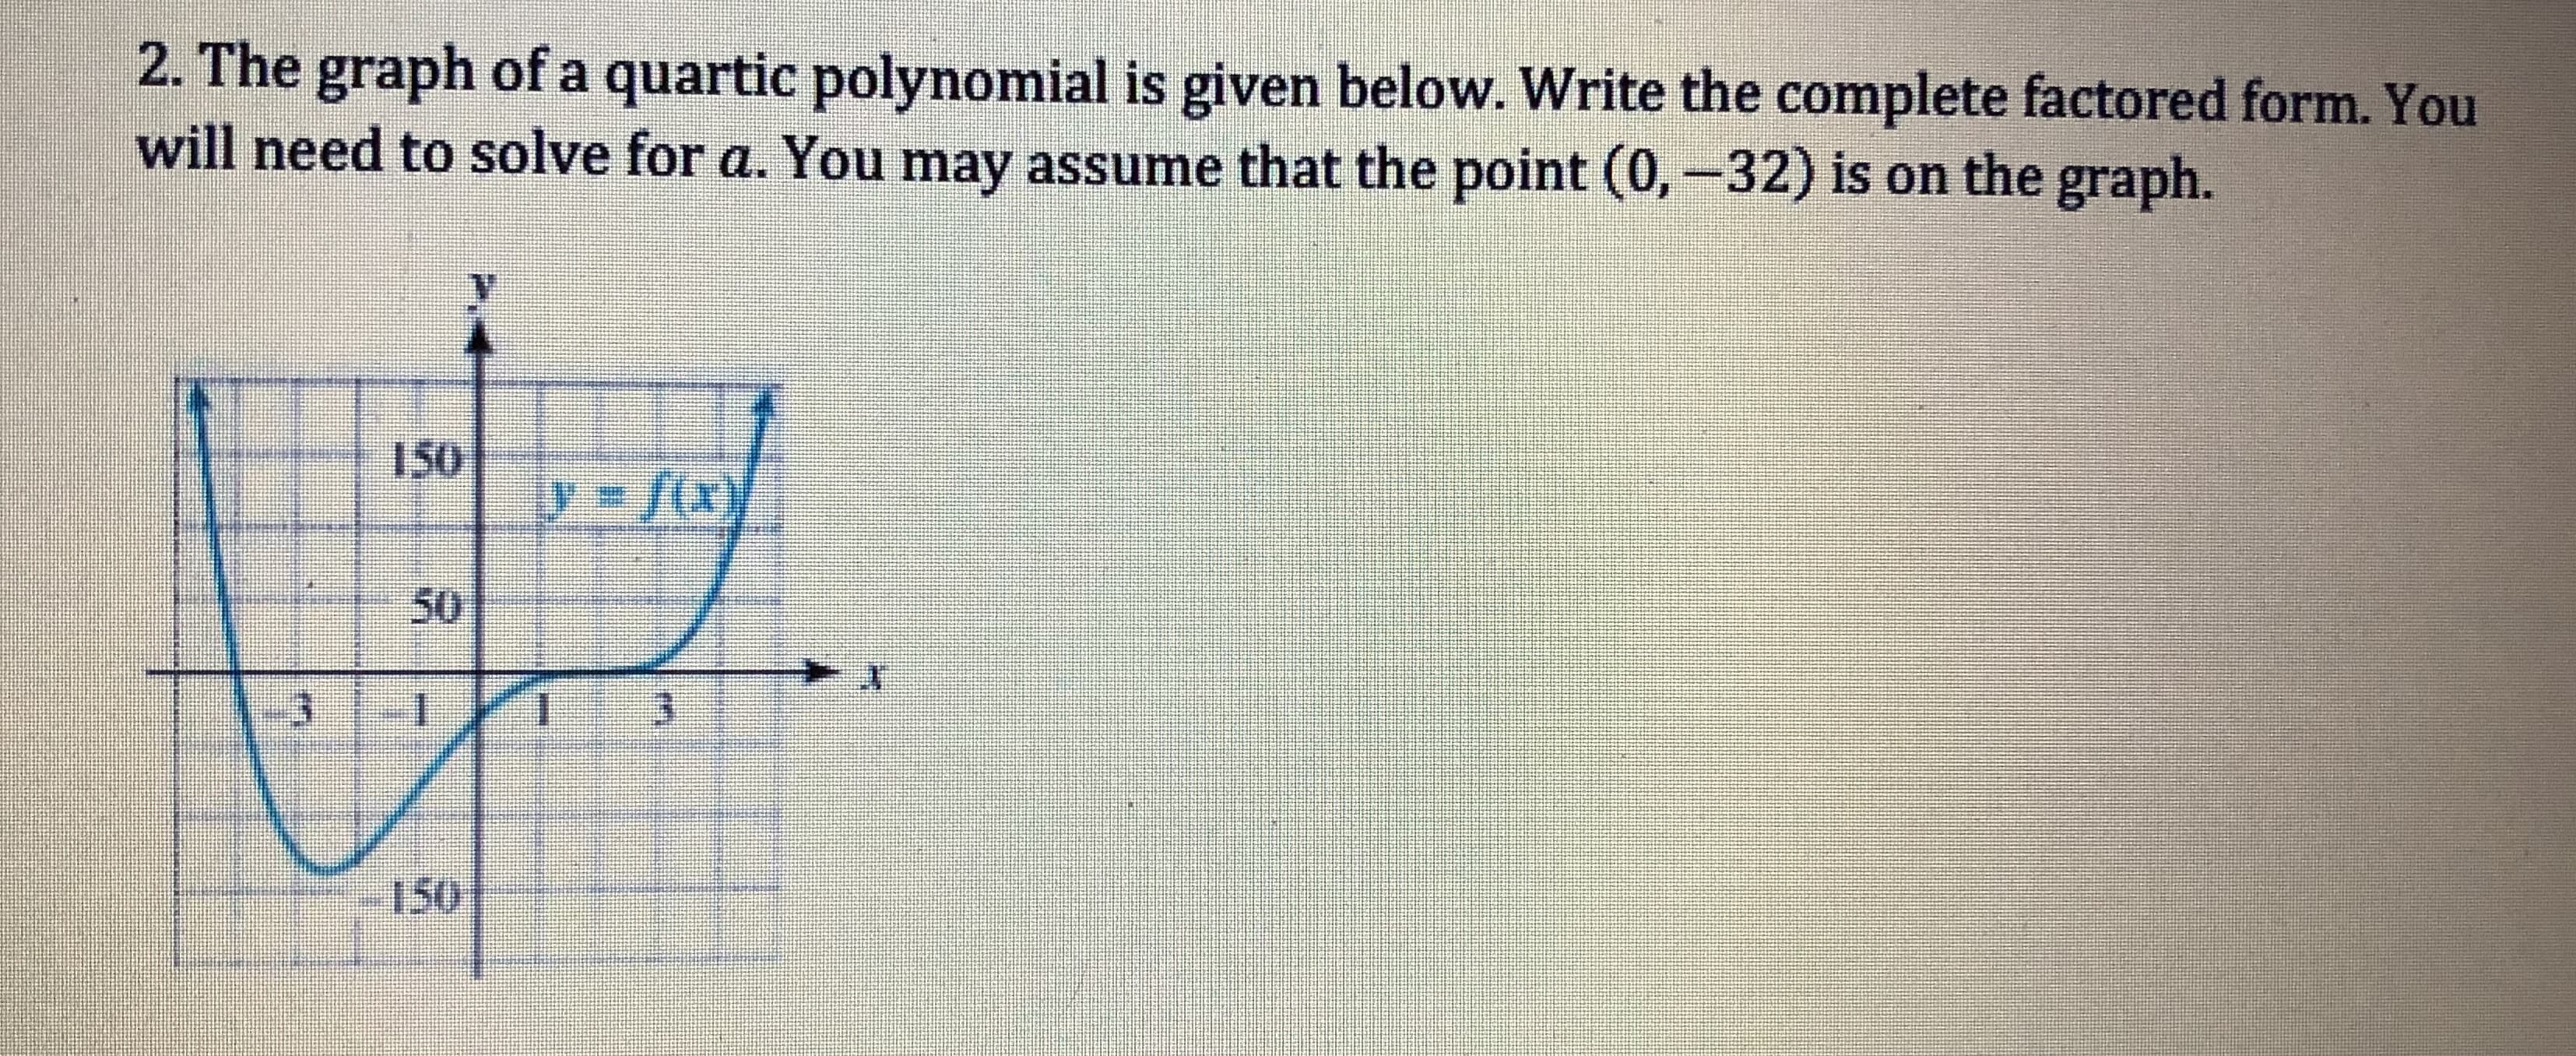 2. The graph of a quartic polynomial is given below. Write the complete factored form. You
will need to solve for a. You may assume that the point (0-32) is on the graph.
